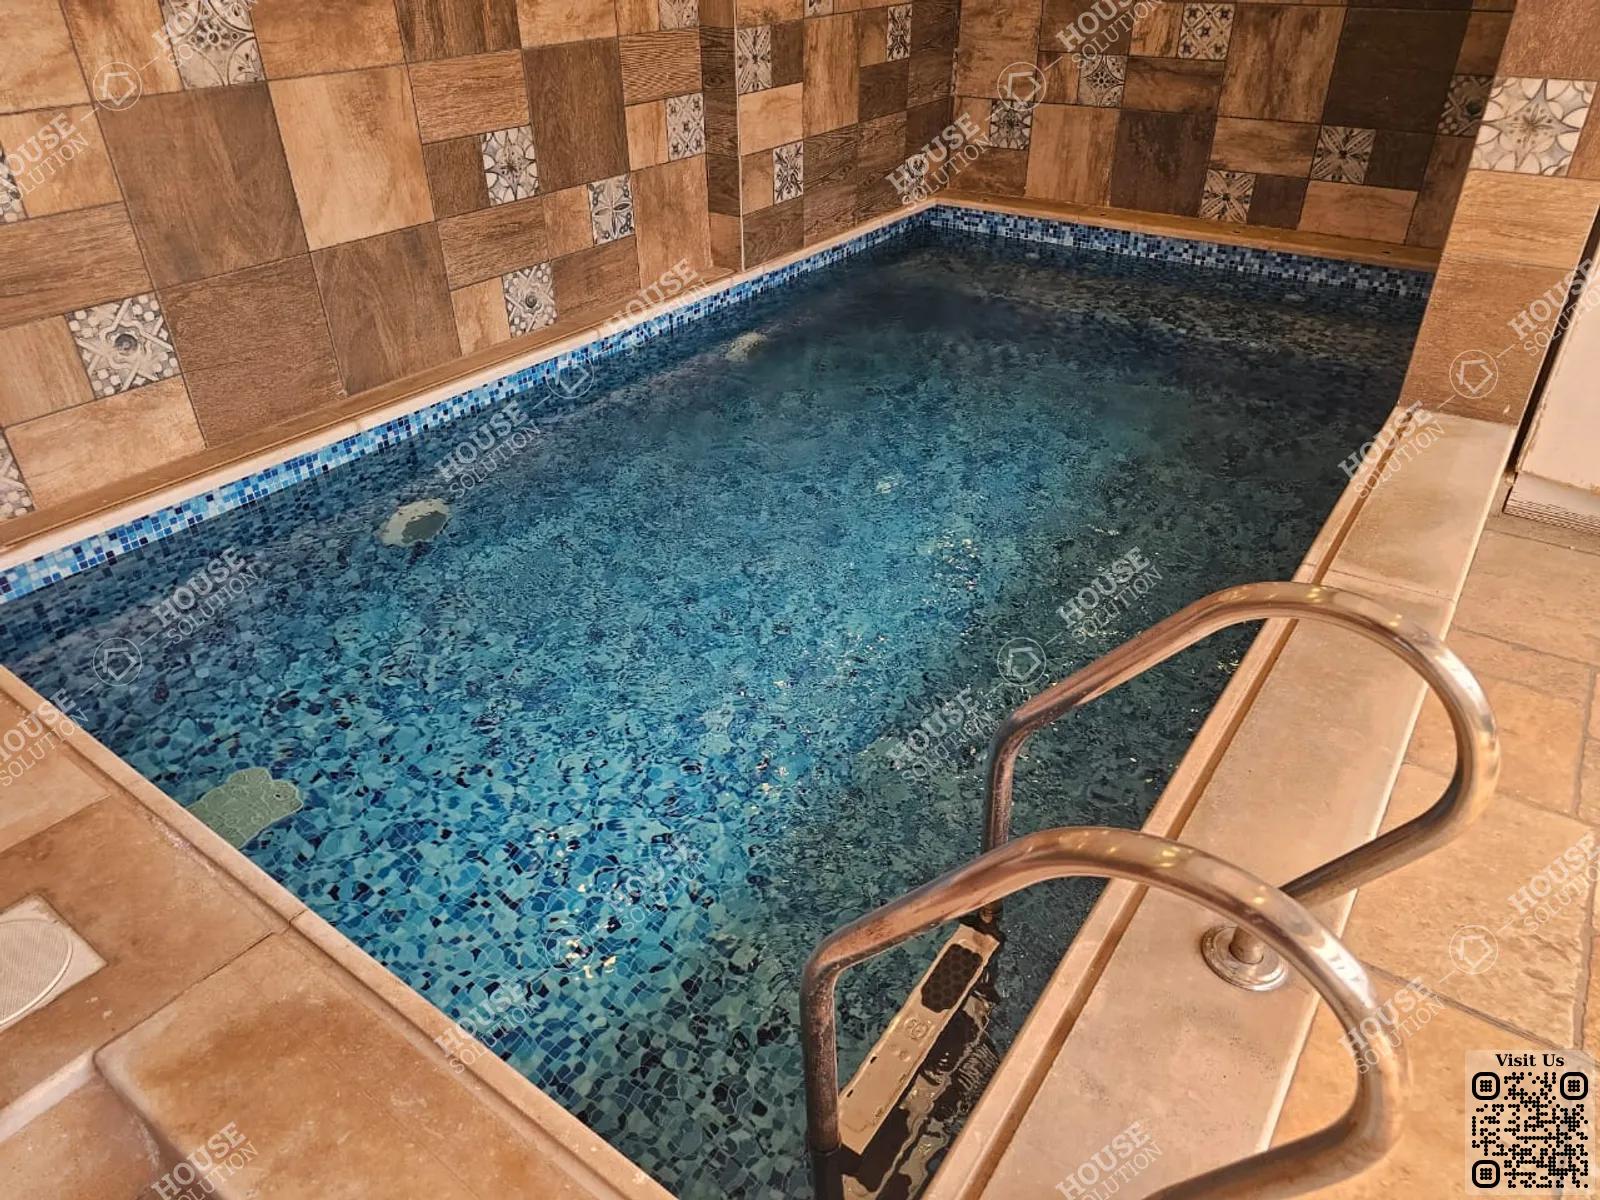 PRIVATE SWIMMING POOL  @ Duplexes For Rent In Maadi Maadi Sarayat Area: 375 m² consists of 3 Bedrooms 4 Bathrooms Modern furnished 5 stars #5855-1